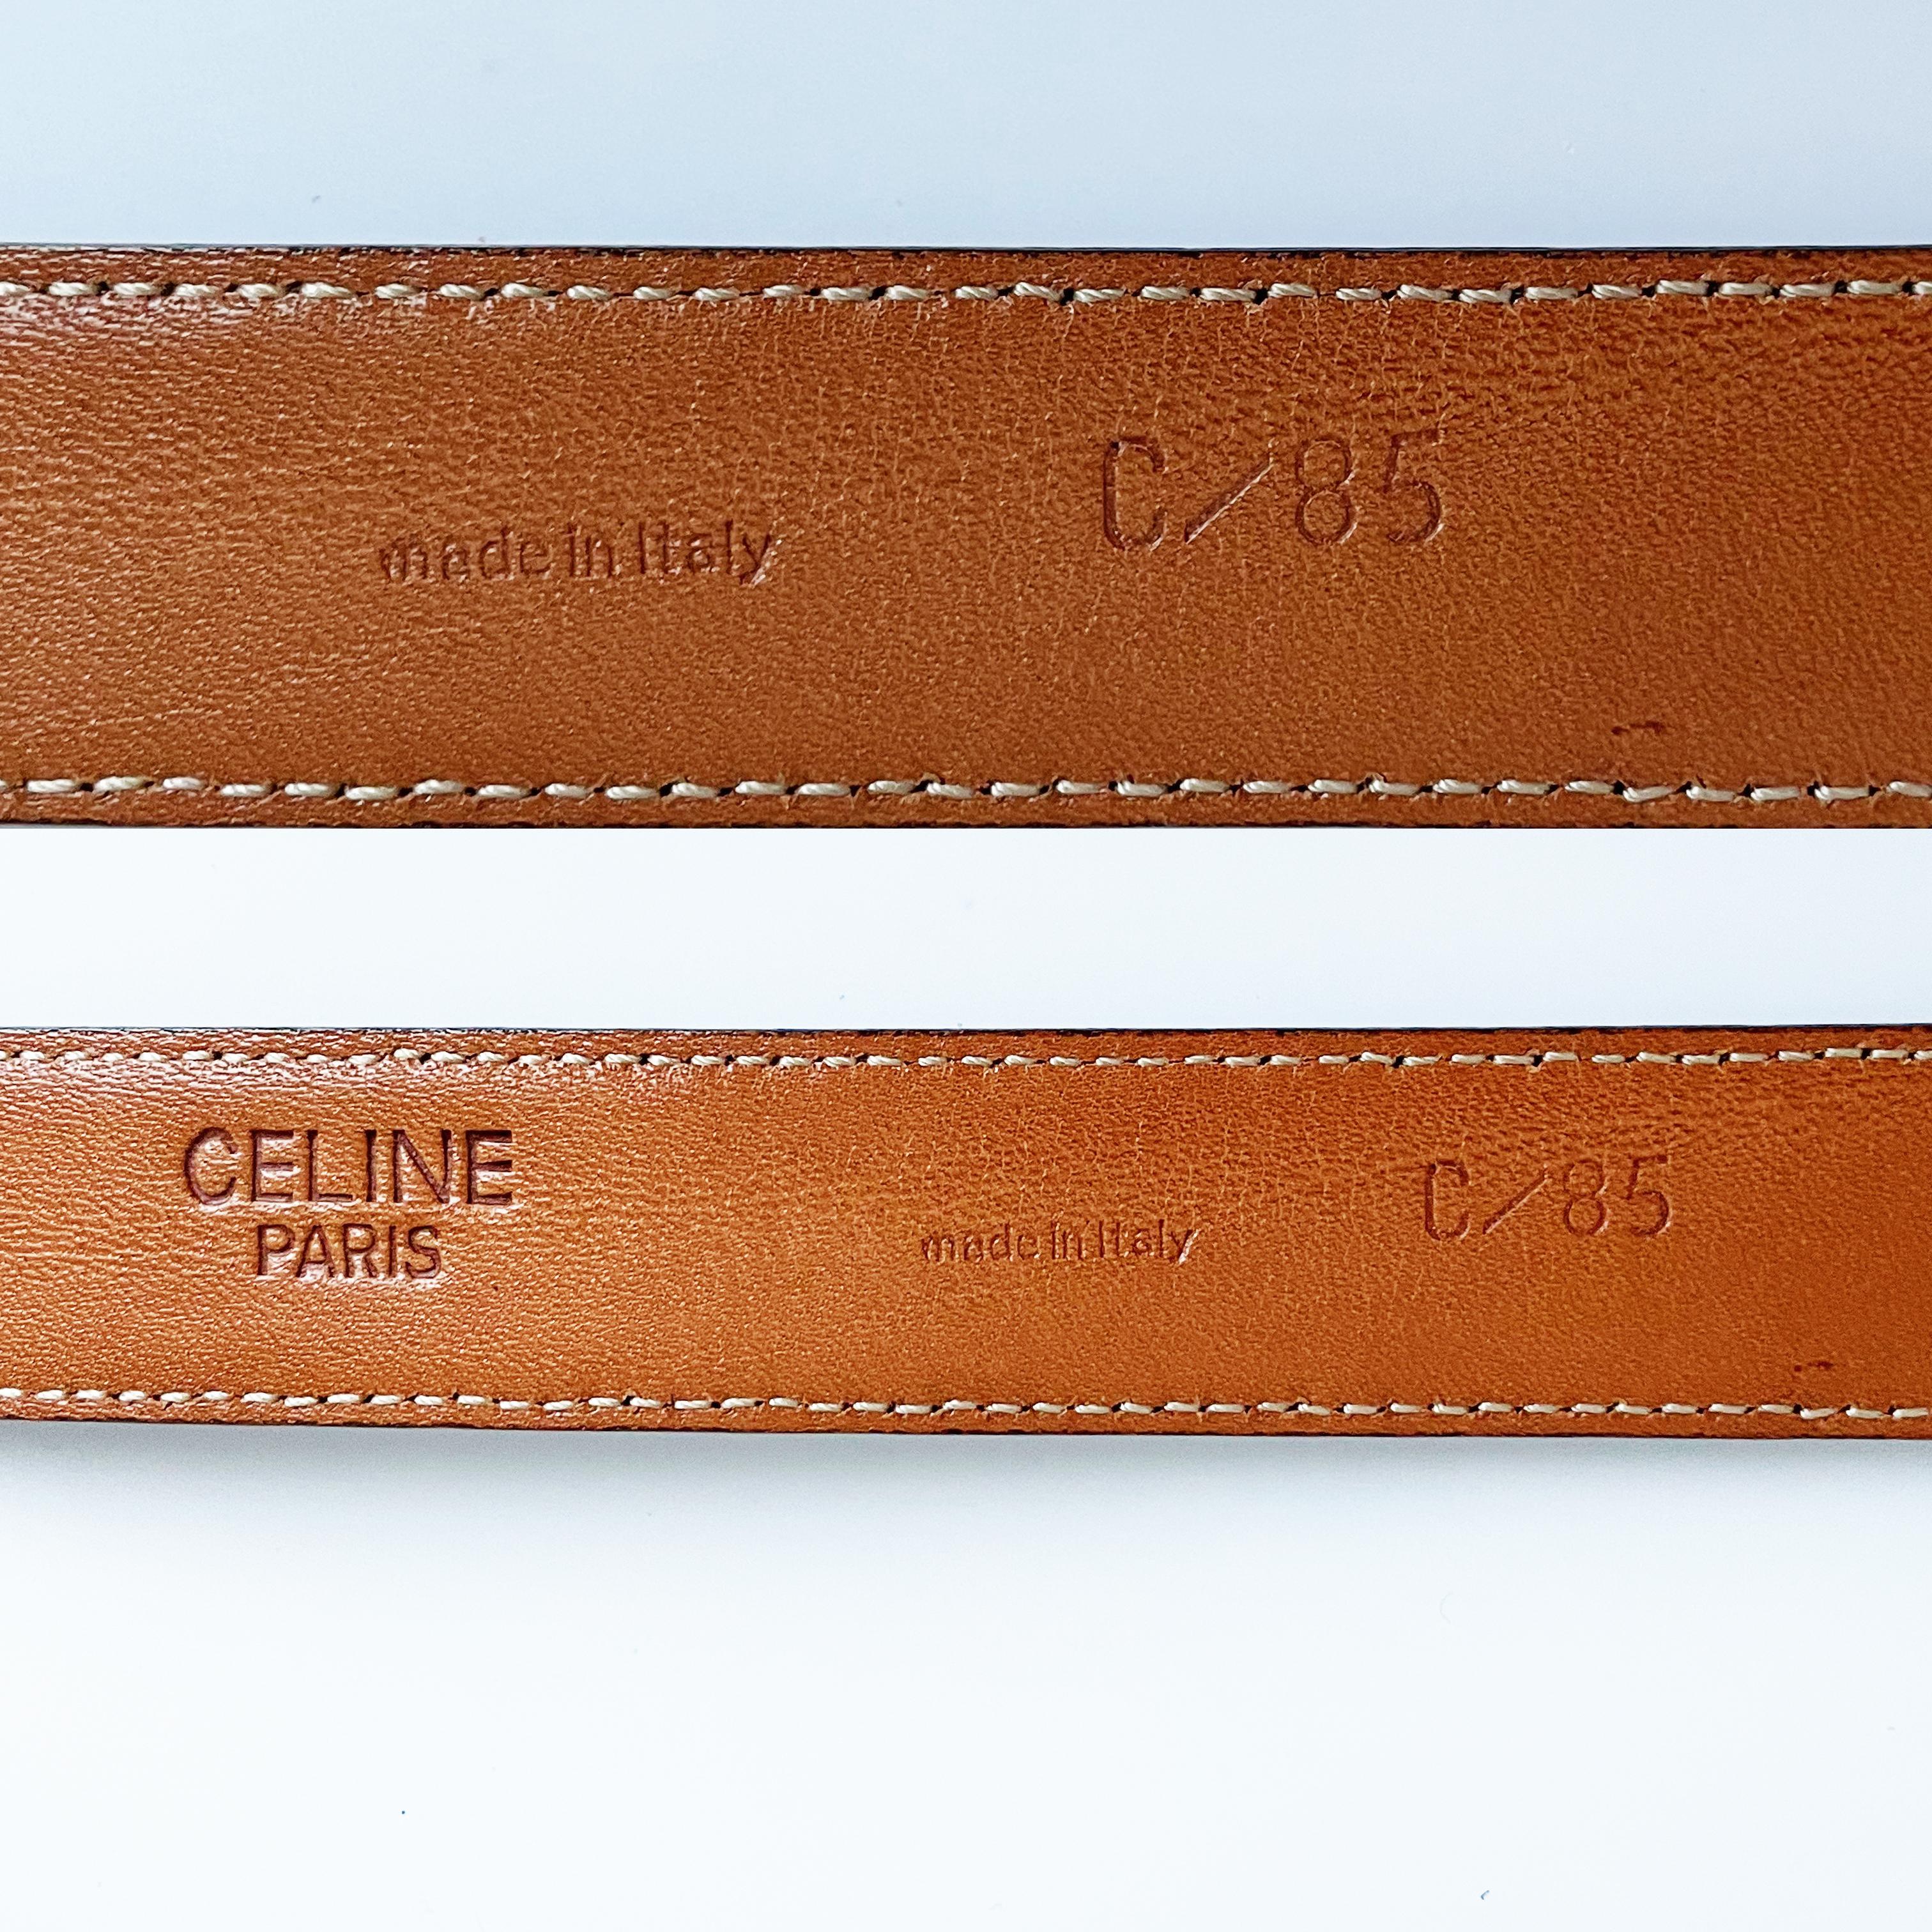 CELINE Paris Belt with Gold Metal Horse Chariot Buckle Leather Size 85 3